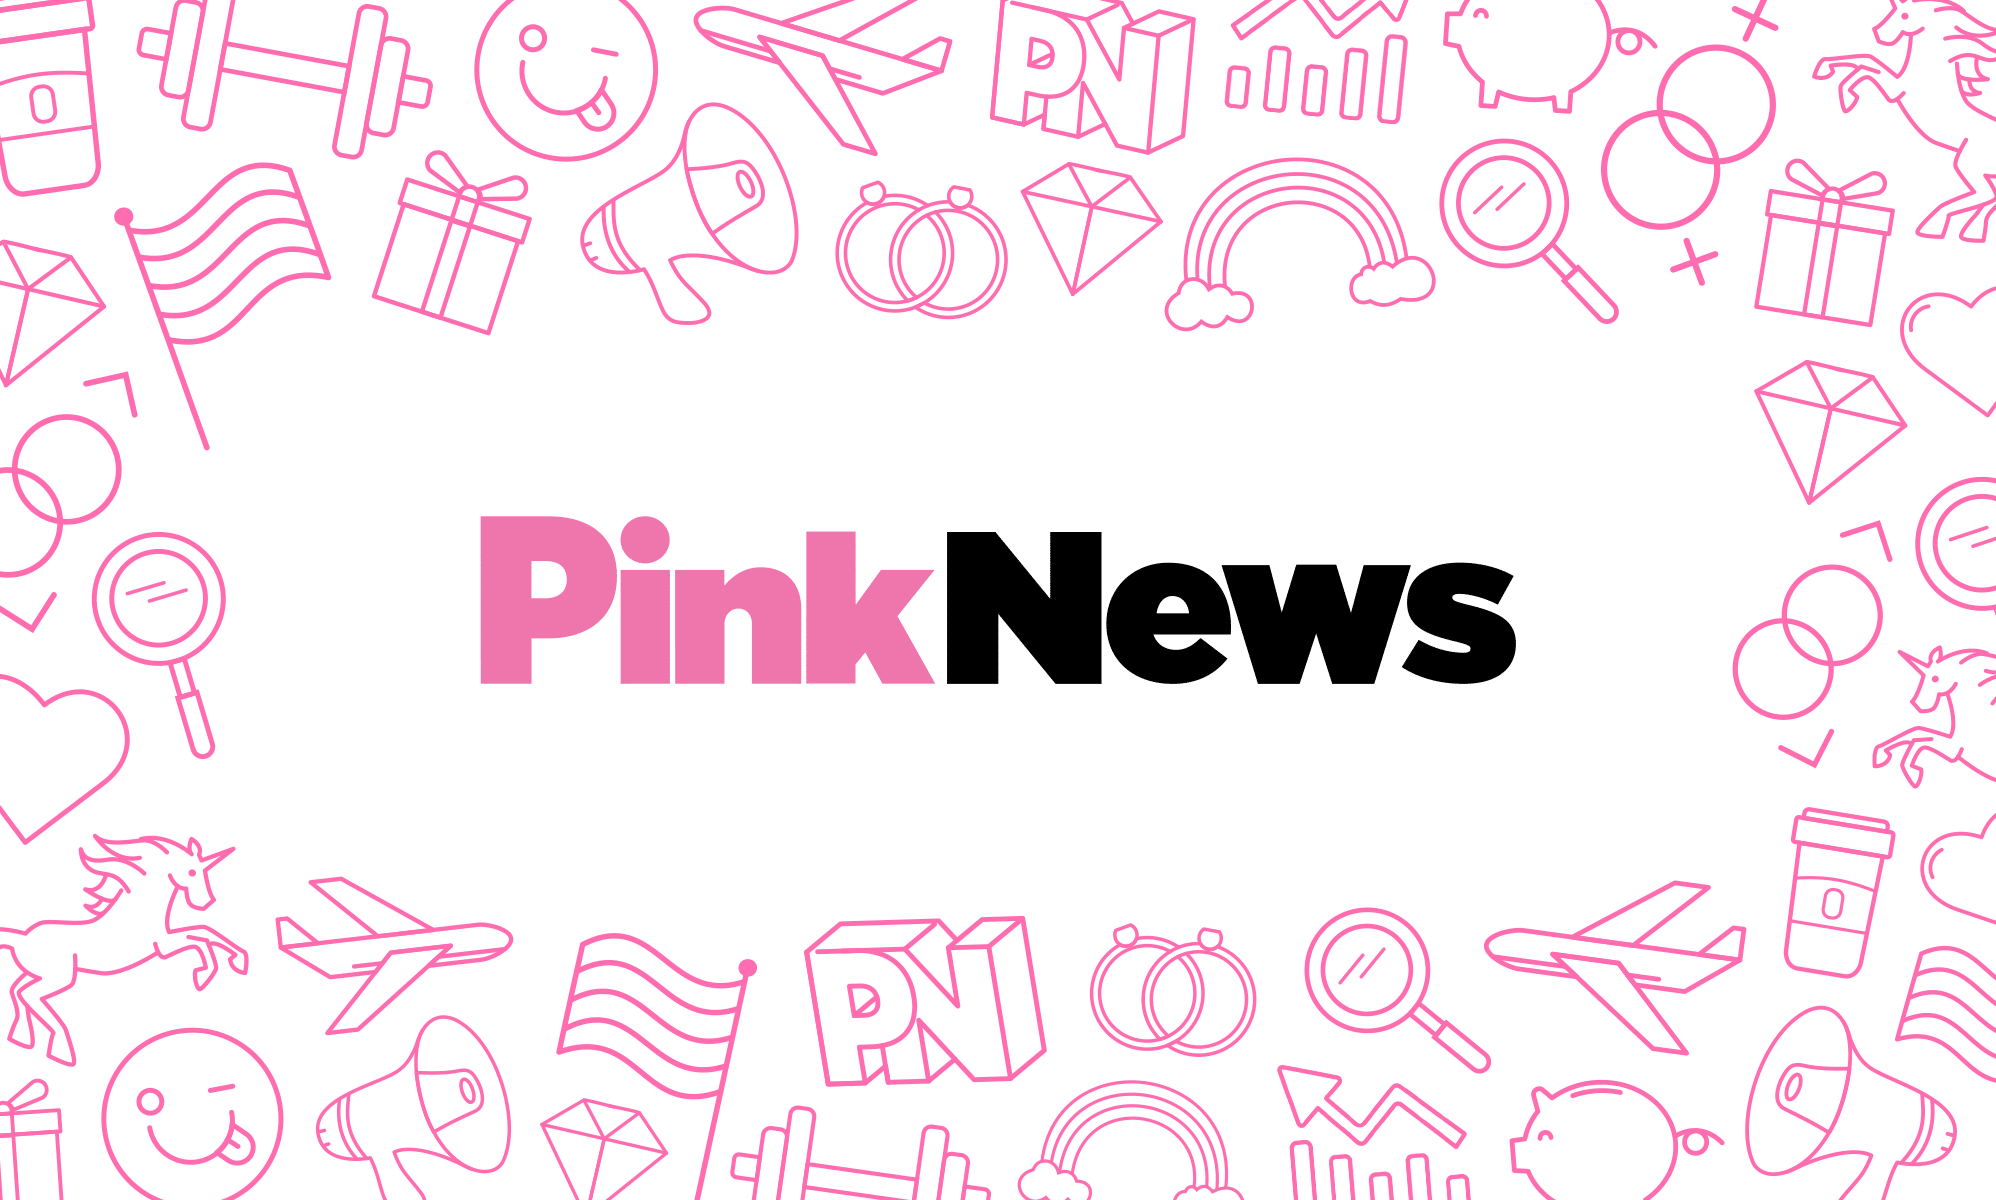 PinkNews to host interactive election debate chaired by Evan Davis